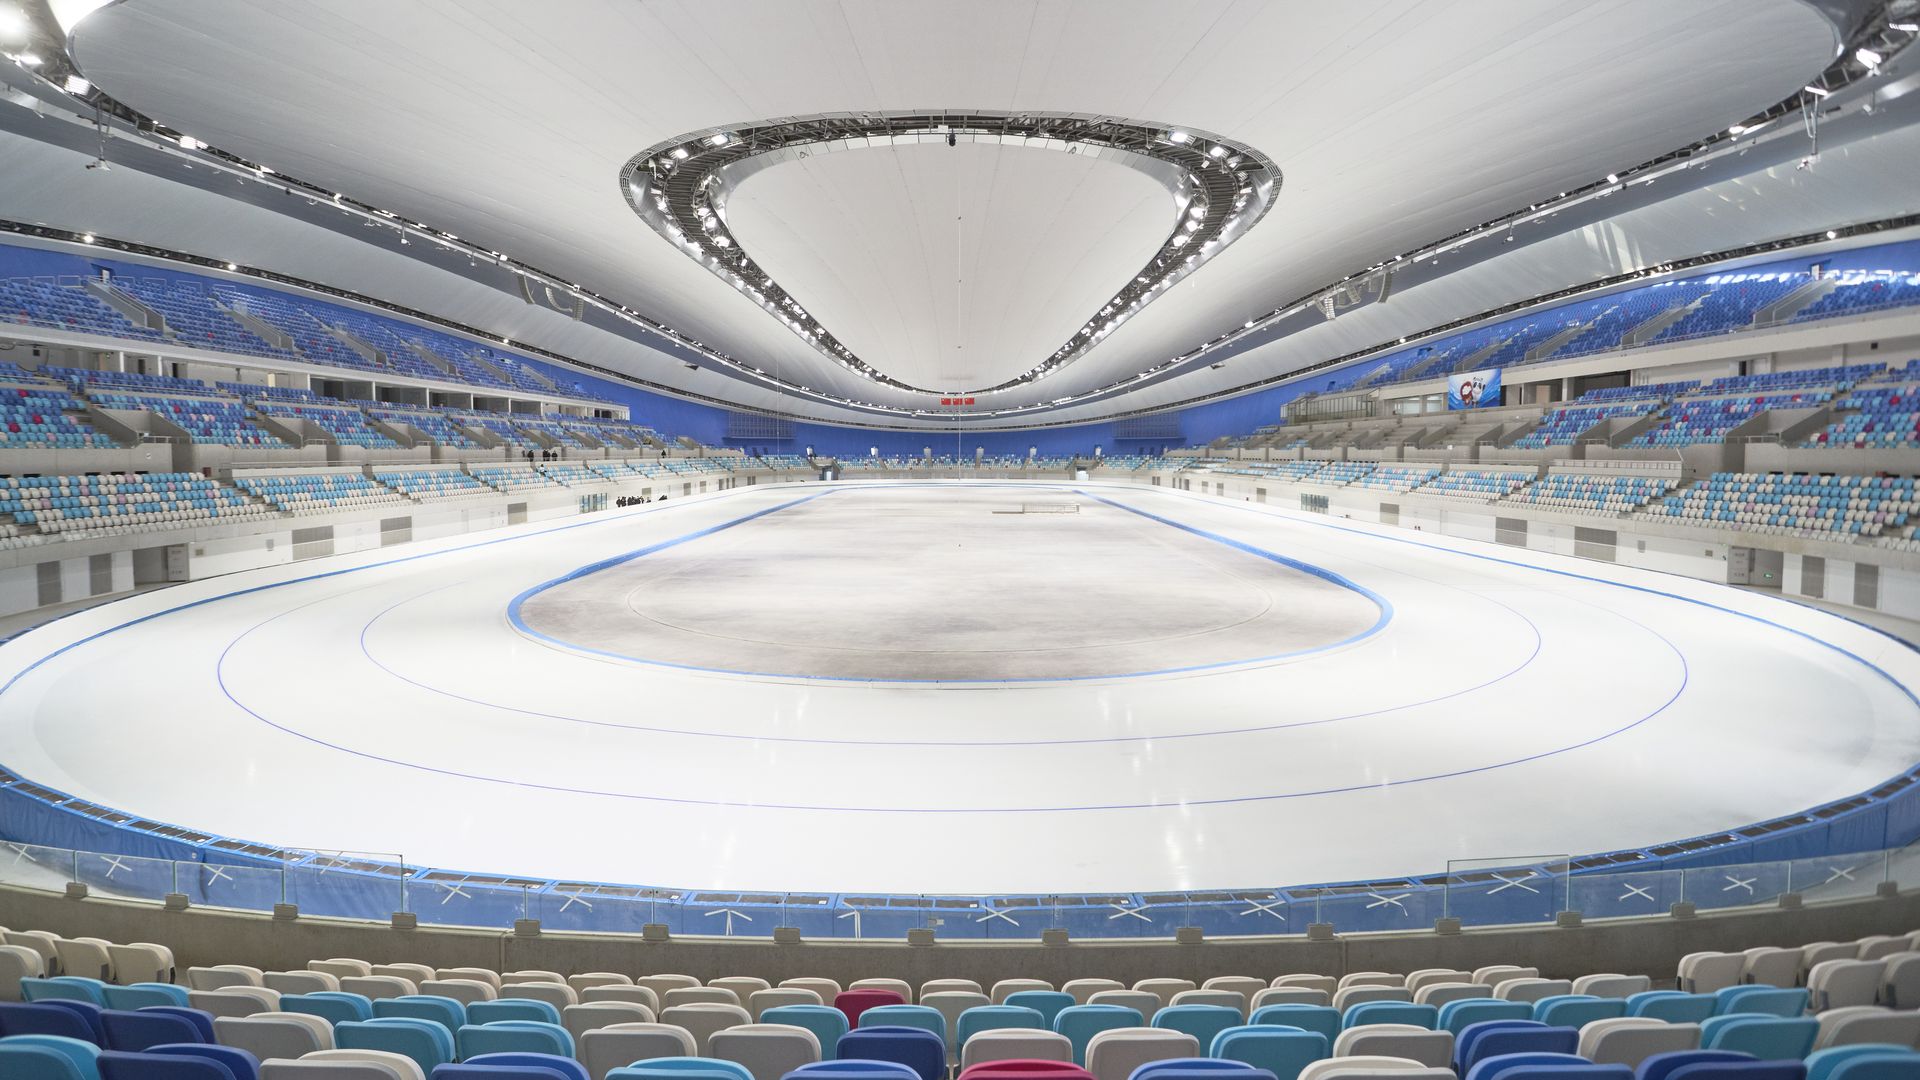 China's National Speed Skating Oval